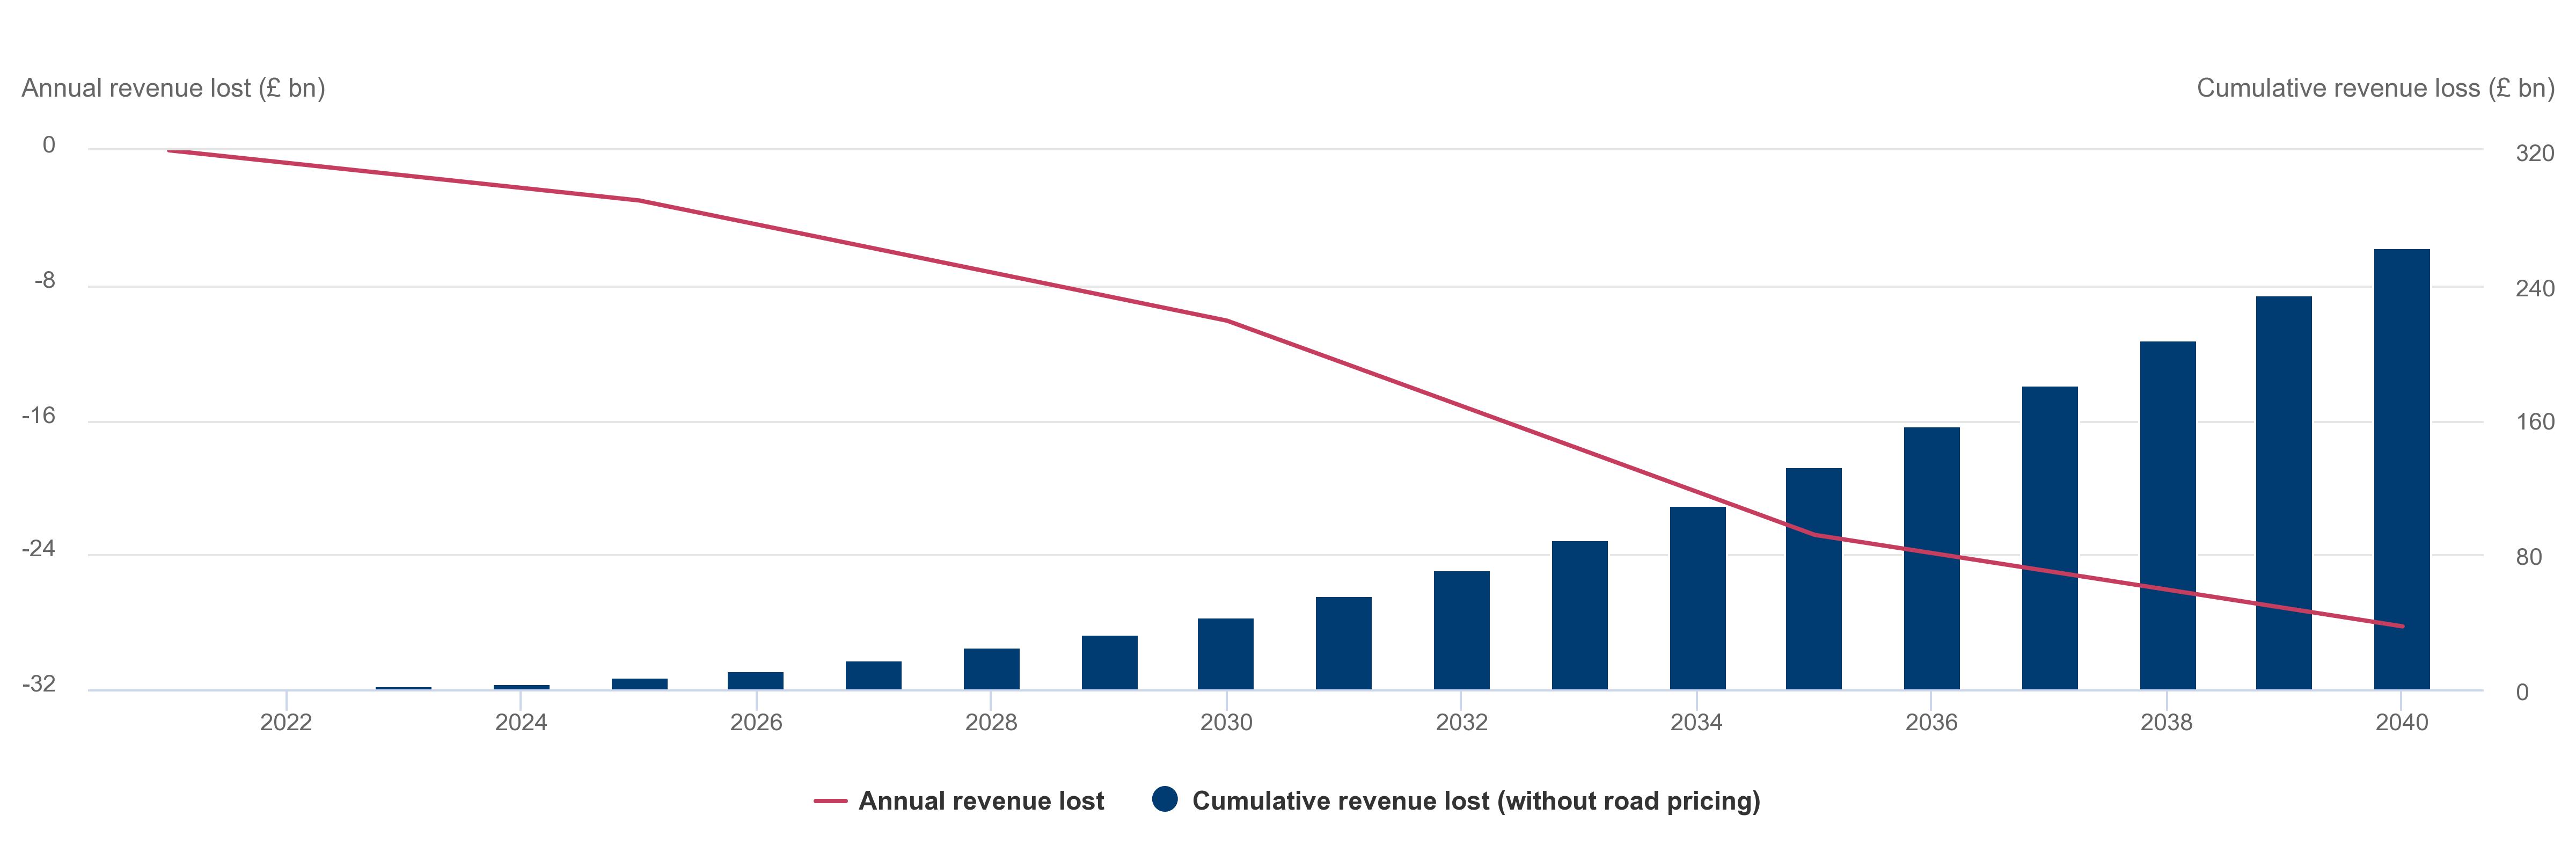 Revenue levels without road pricing